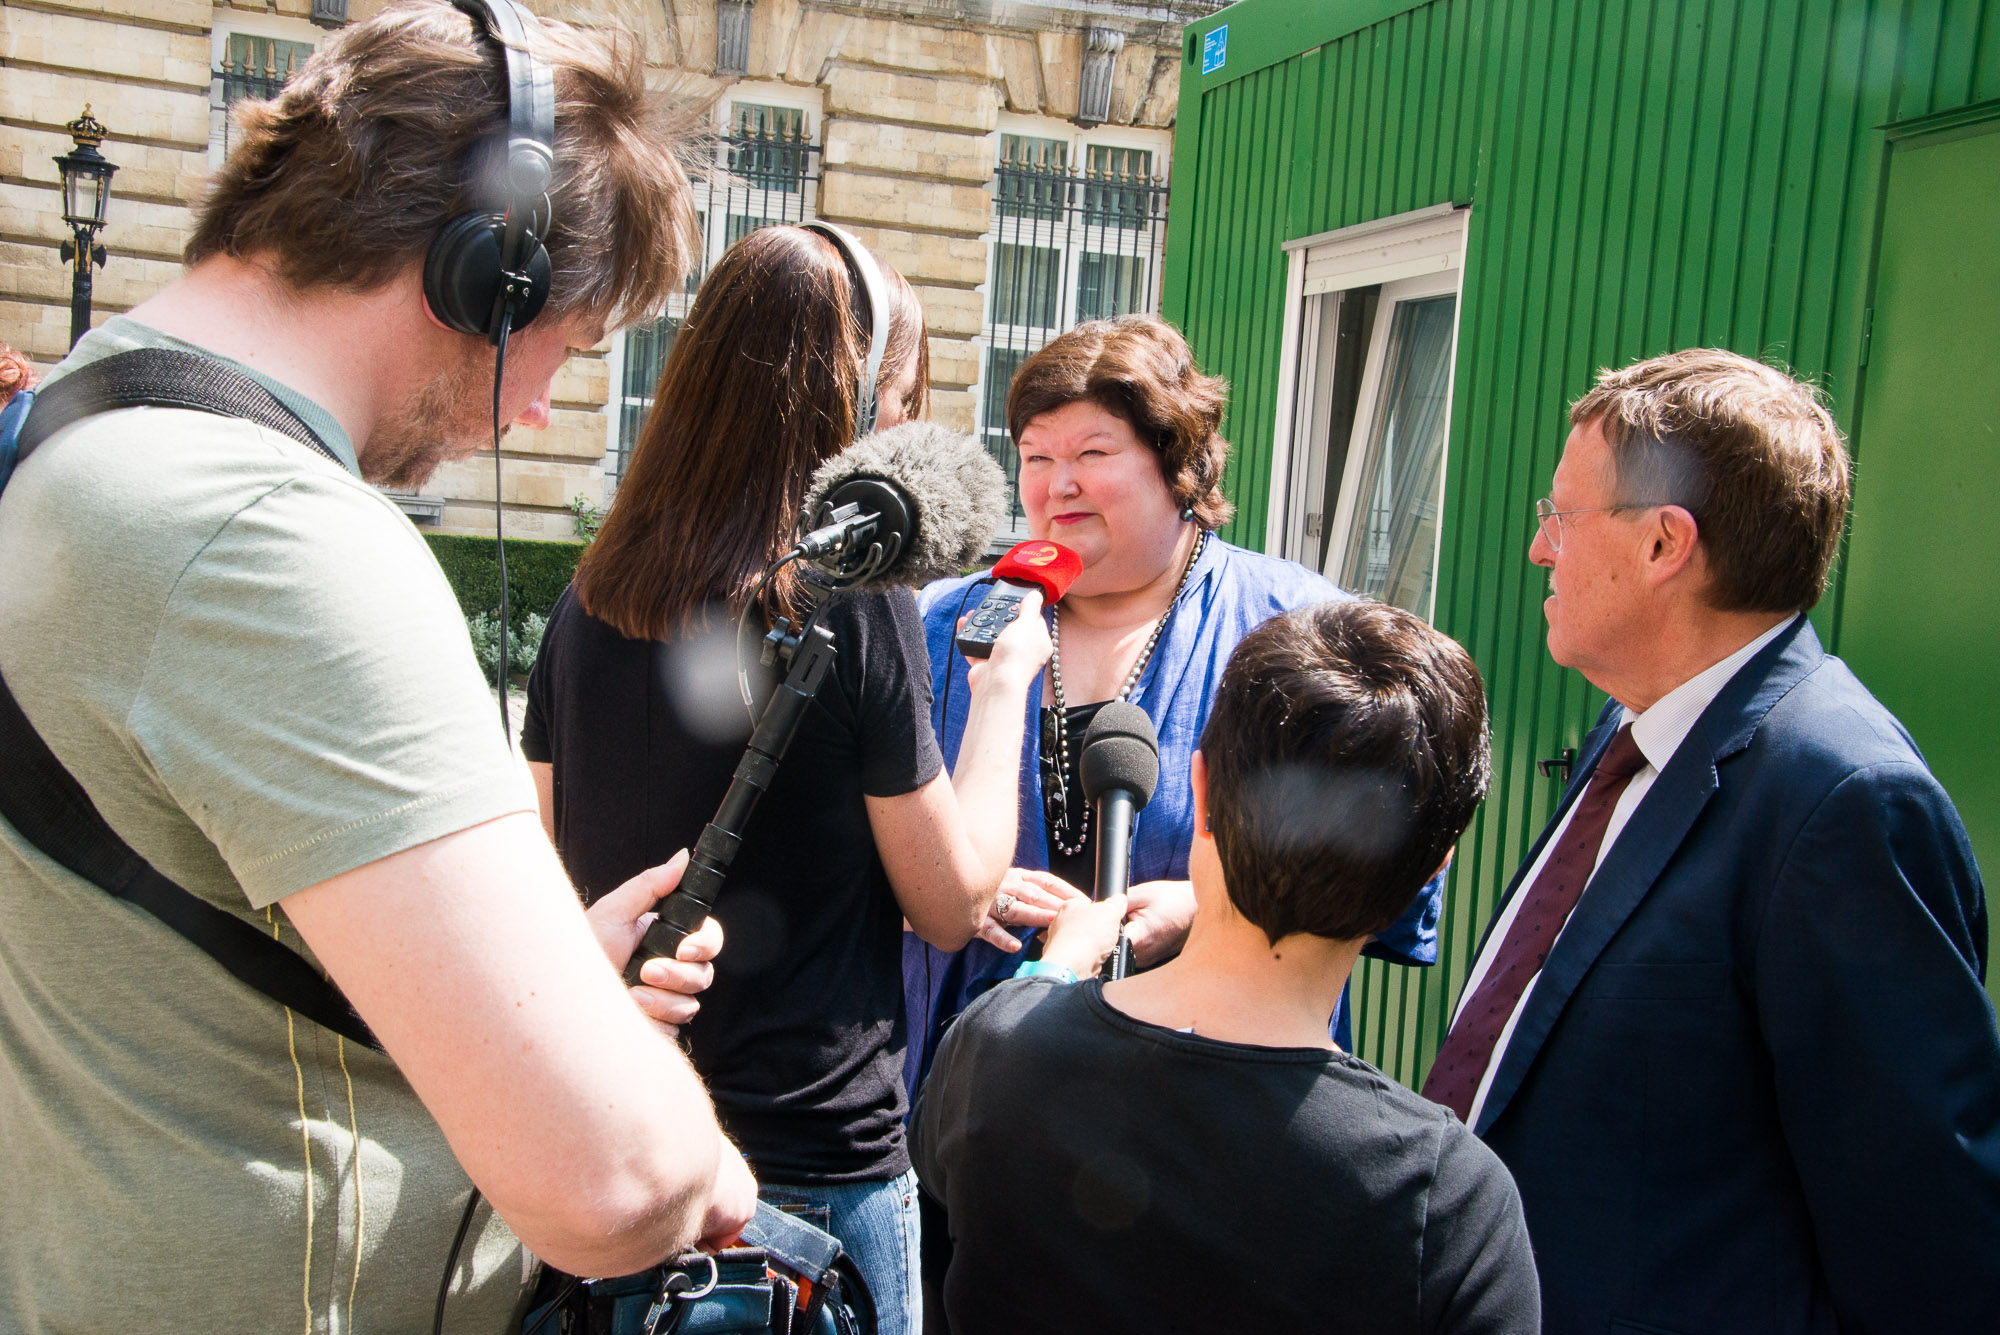 [Image: Belgian Minister and MPs touched by women’s stories in the African pop-up family planning clinic]